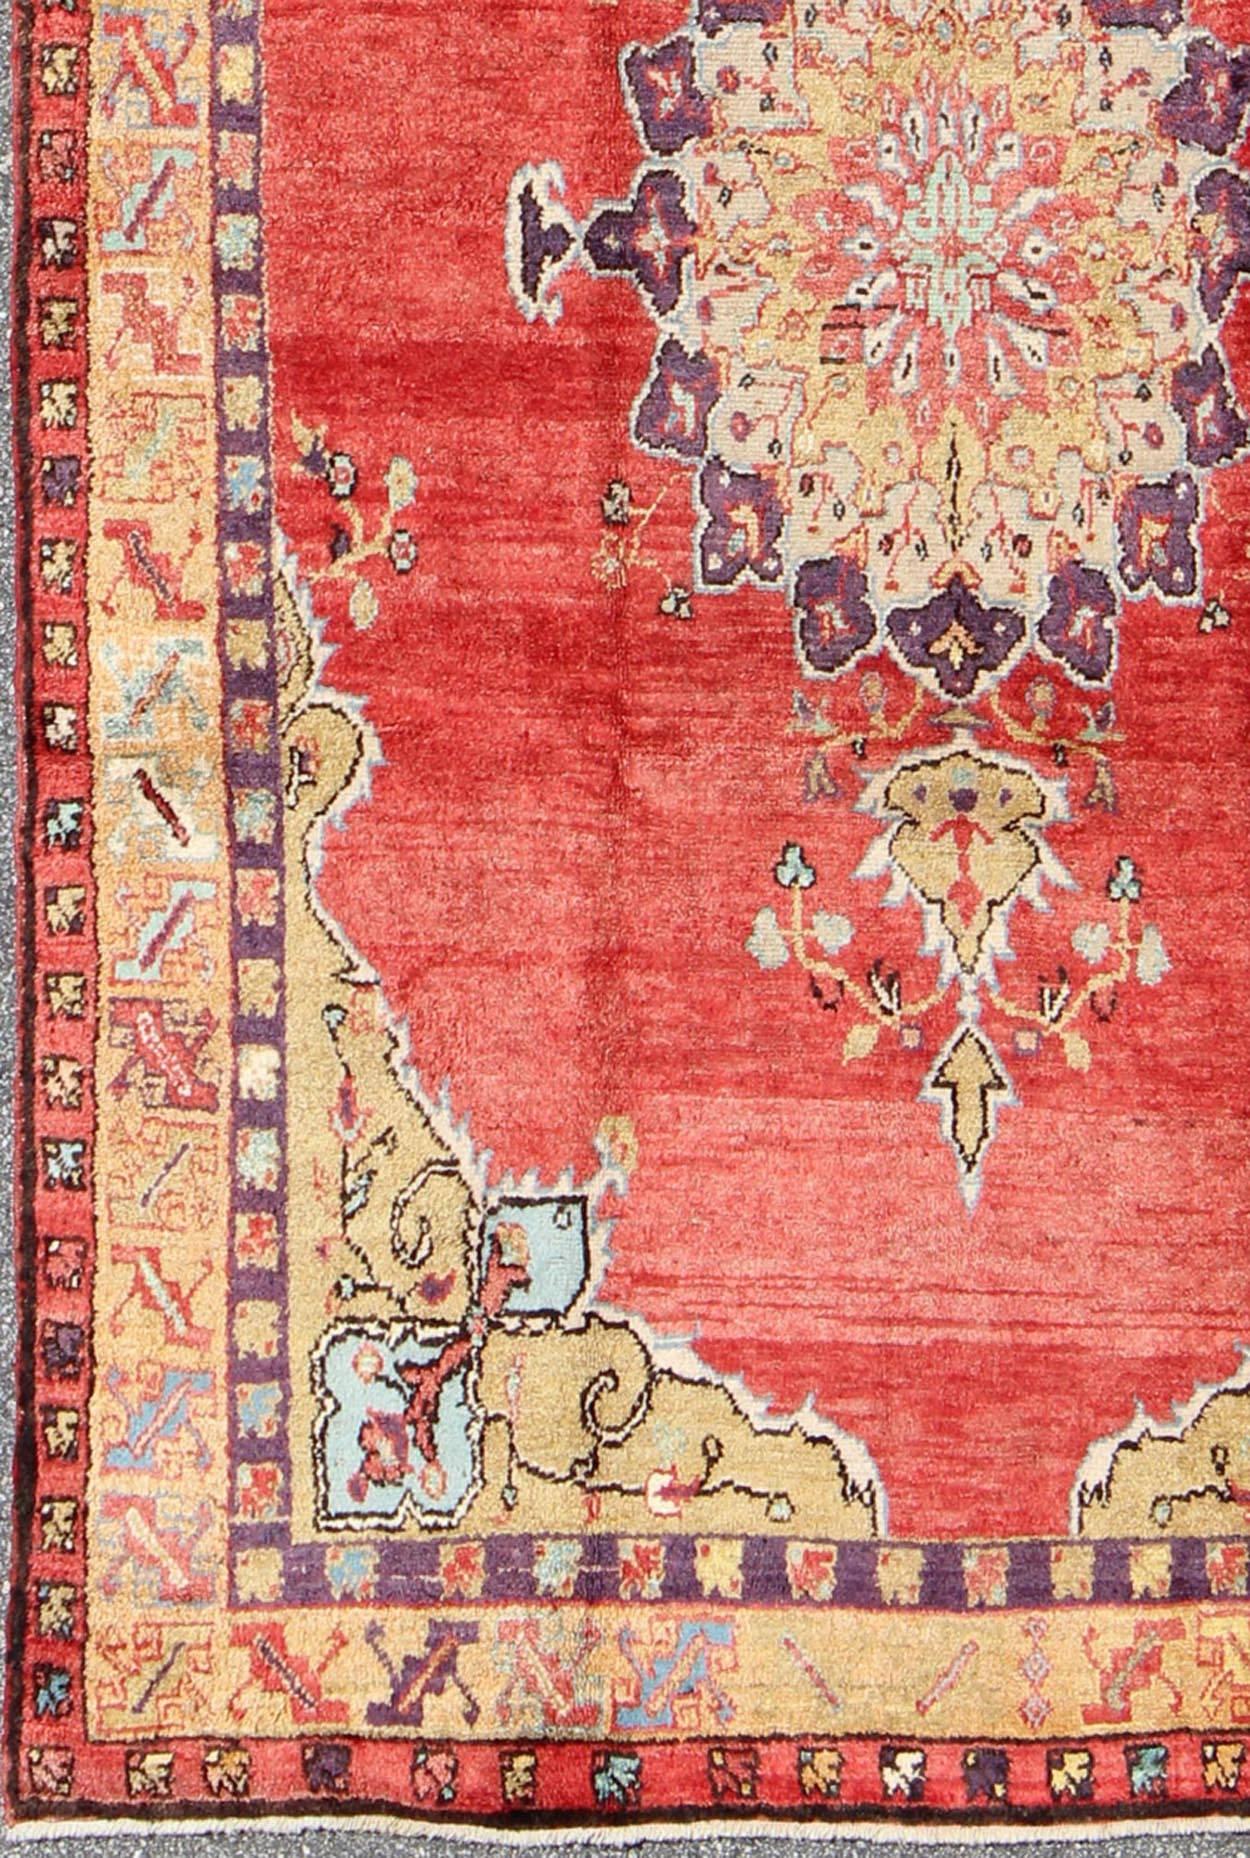 Colorful Vintage Turkish Oushak Rug with Red and Gold Colors.
This colorful Oushak carpet rests beautifully upon a field of elegant red. A large medallion of brown, taupe, purple and gray takes center stage and is well balanced by four prominent